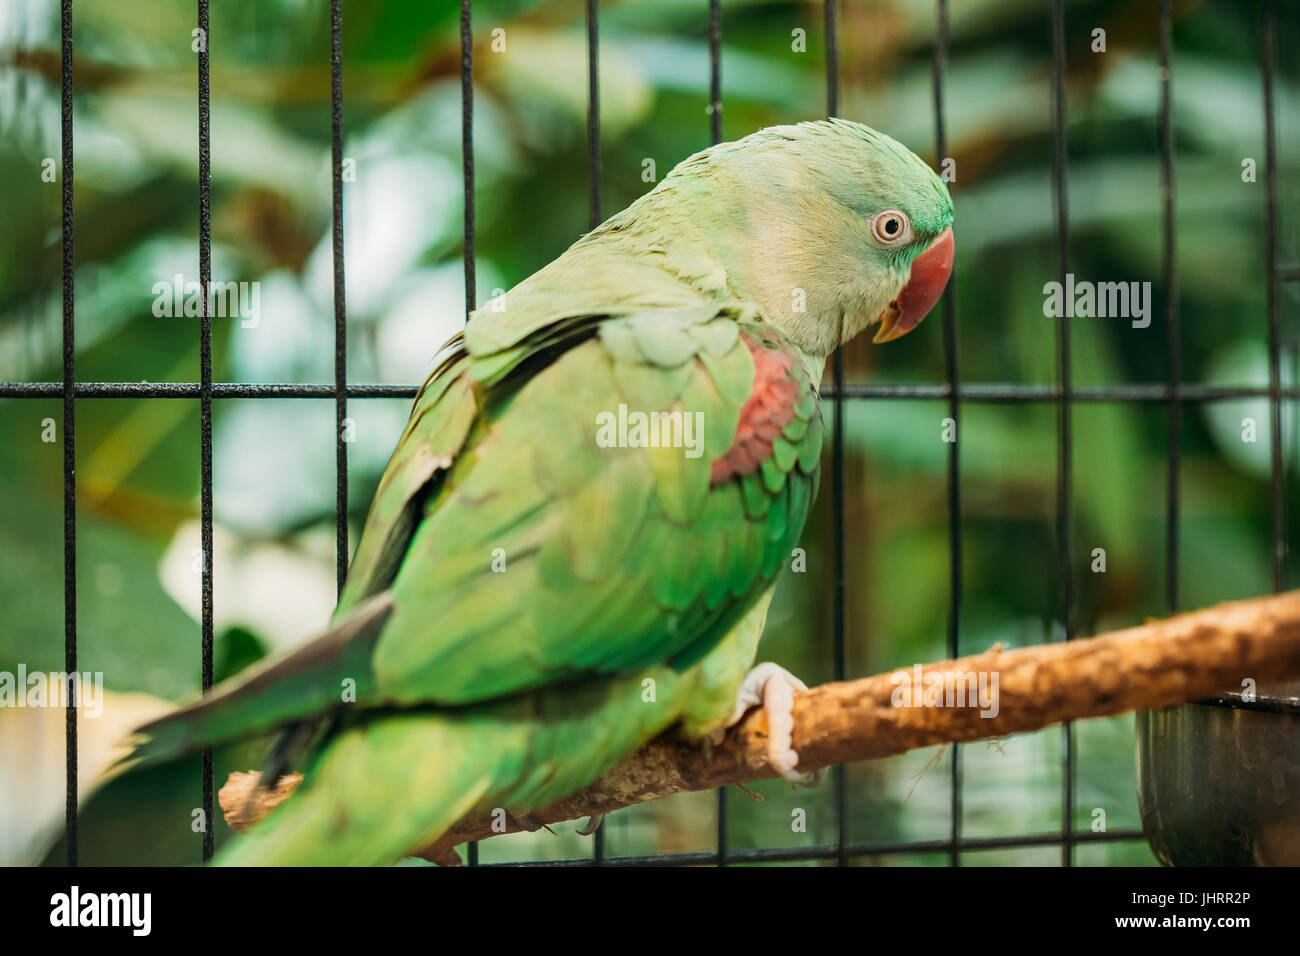 Alexandrine Parakeet Or Alexandrian Parrot Or Psittacula Eupatria Is A Member Of The Psittaciformes Order And Of The Family Psittaculidae. Two Birds I Stock Photo